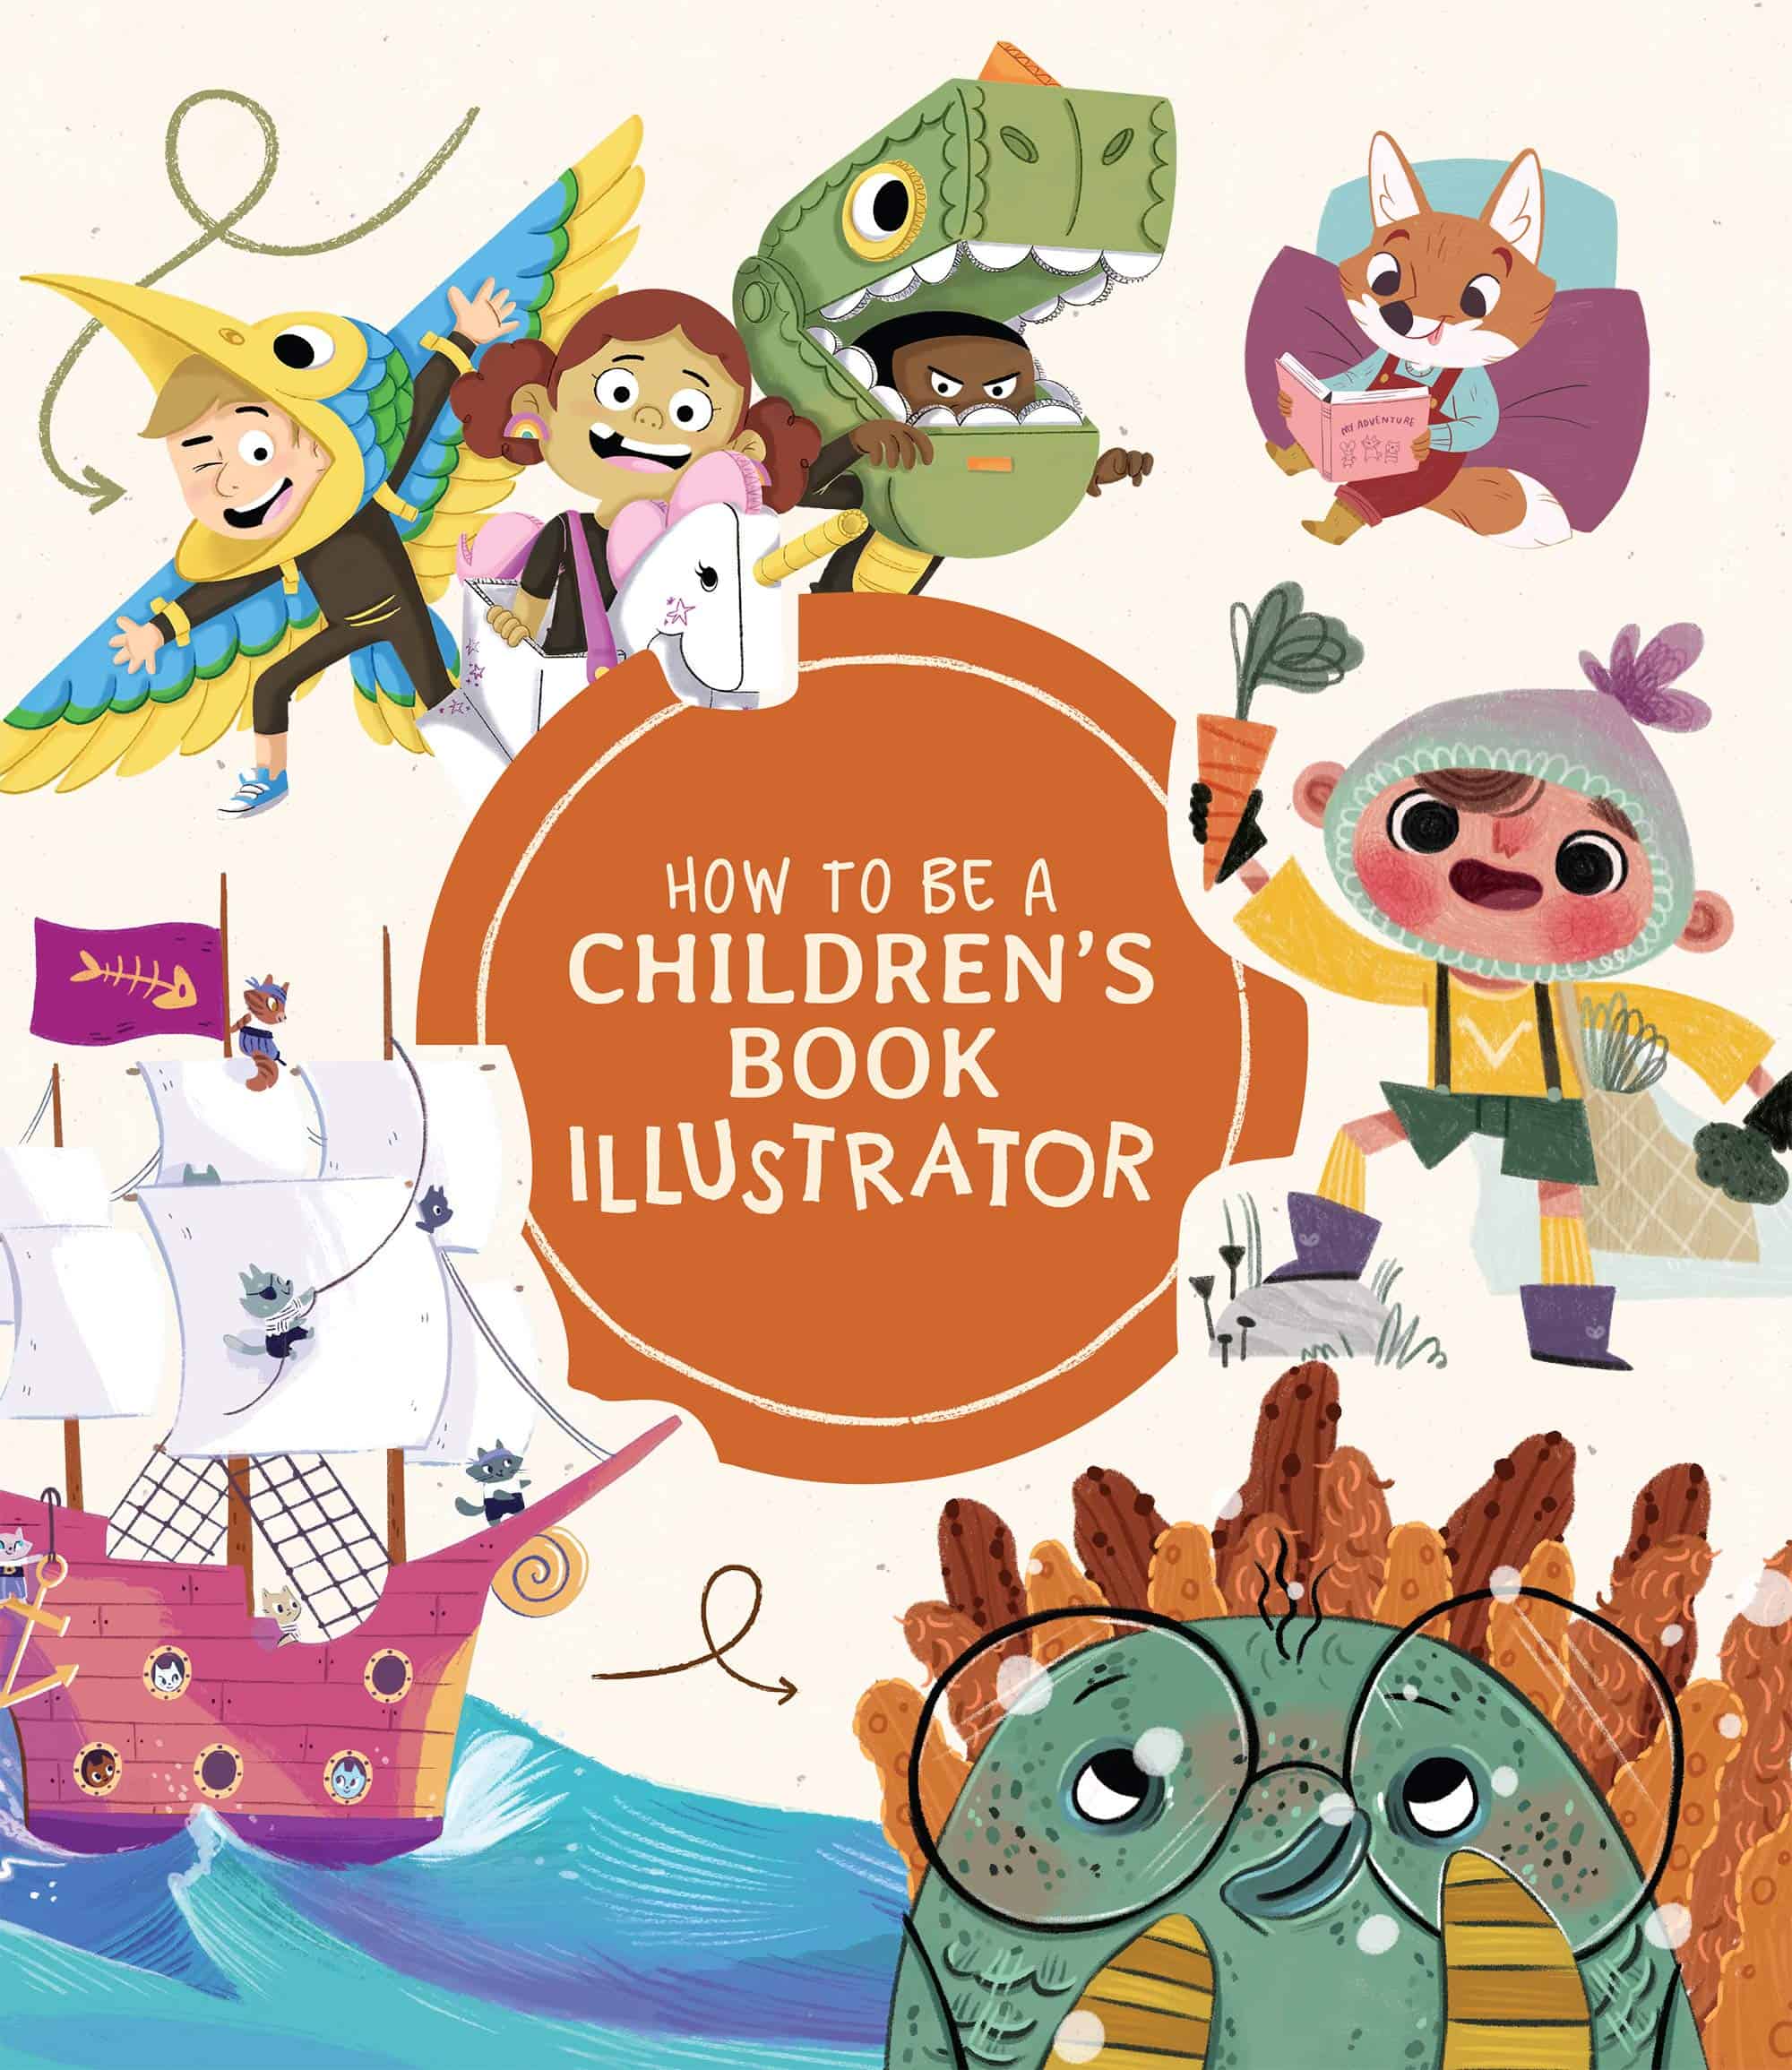 How to be a children's book illustrator book to help you illustrate your story